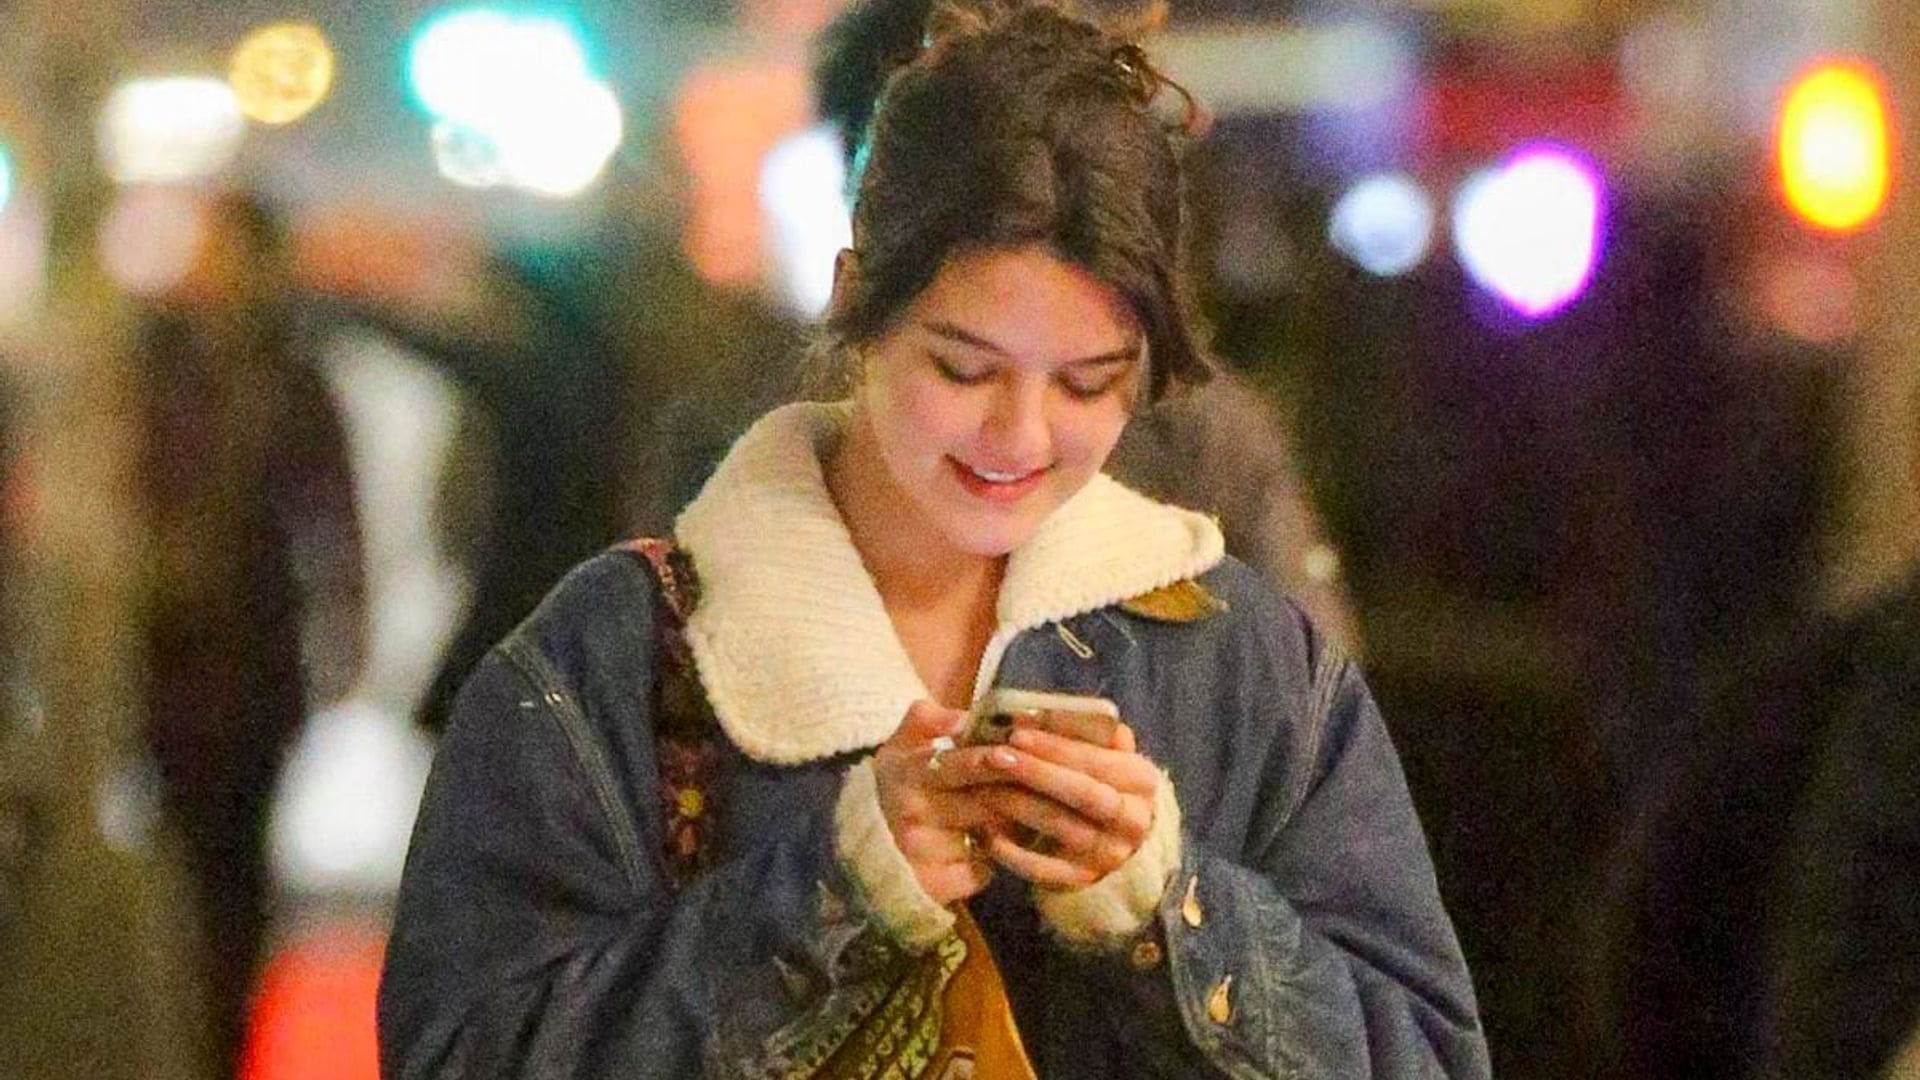 Suri Cruise can’t stop smiling while texting in NYC with a fashionable outfit